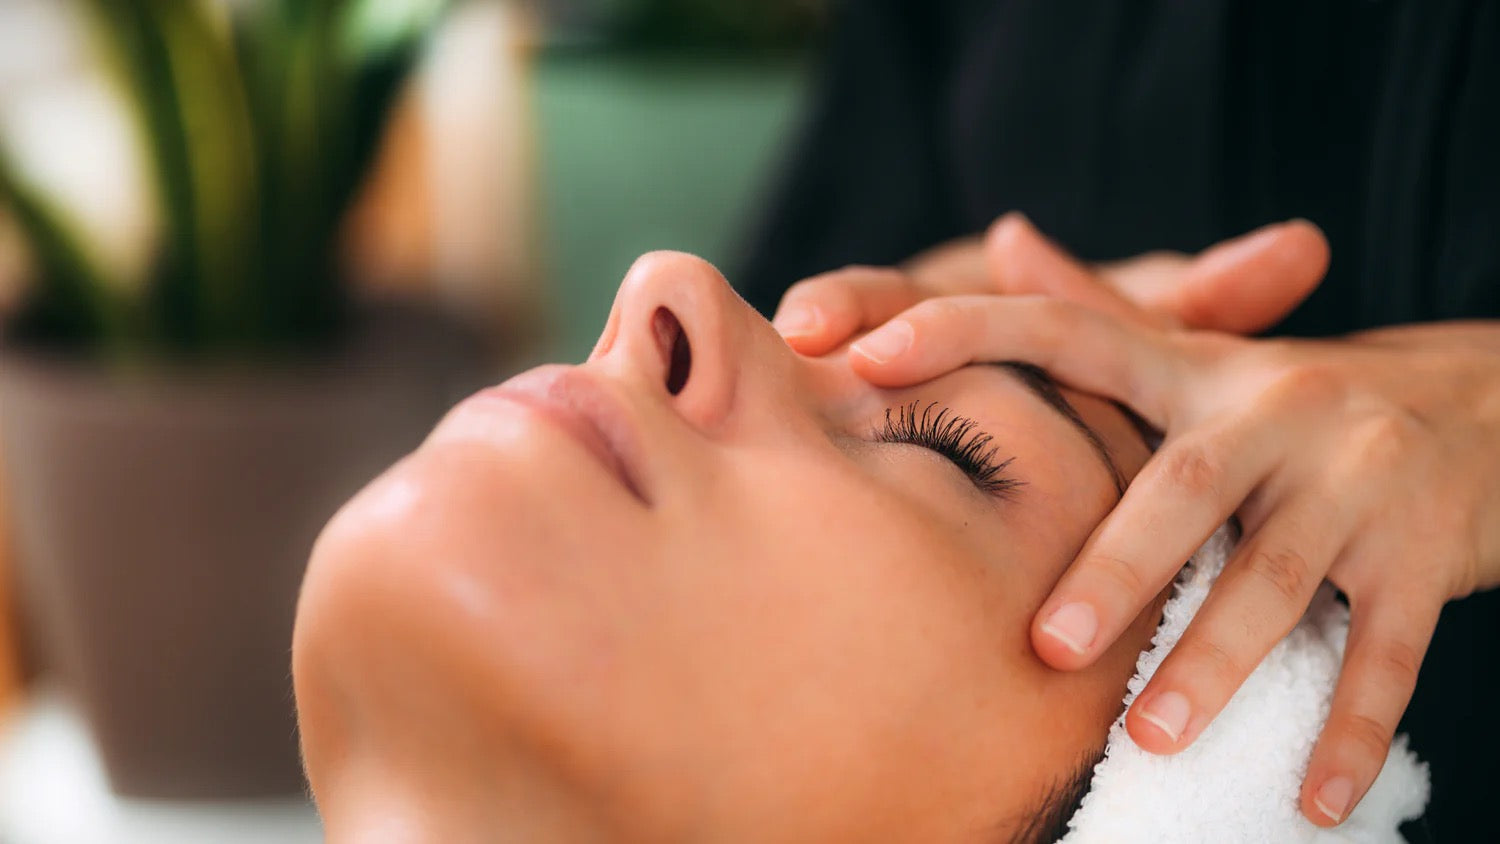 Facial massage: What is it and what are its benefits?